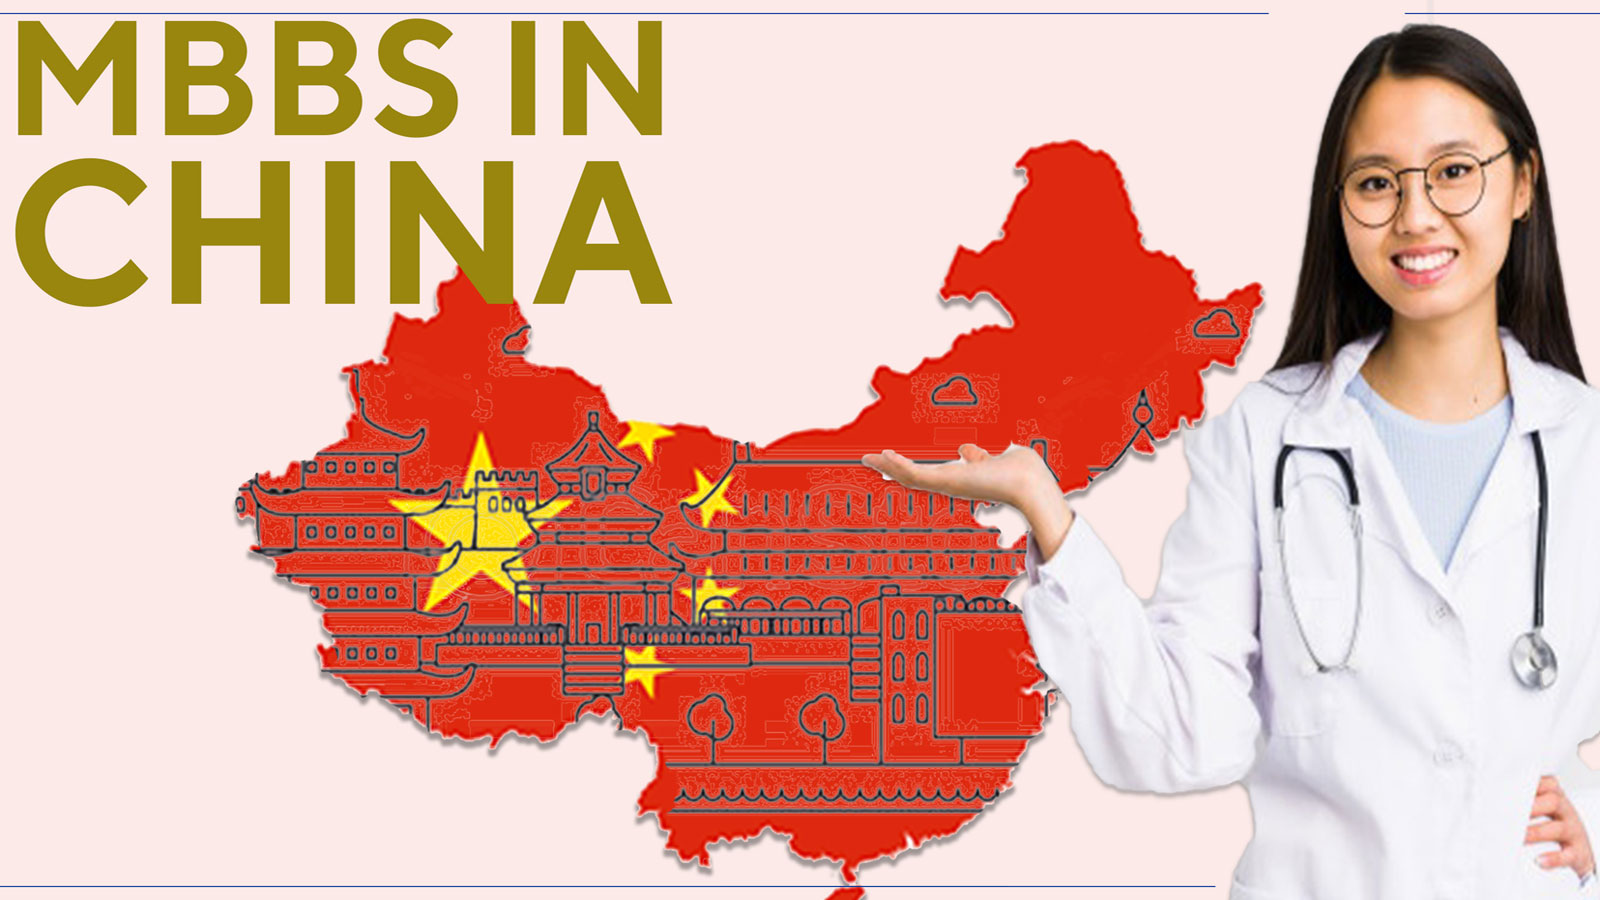 Attention MBBS in China: Those students desiring to pursue MBBS in China should read this